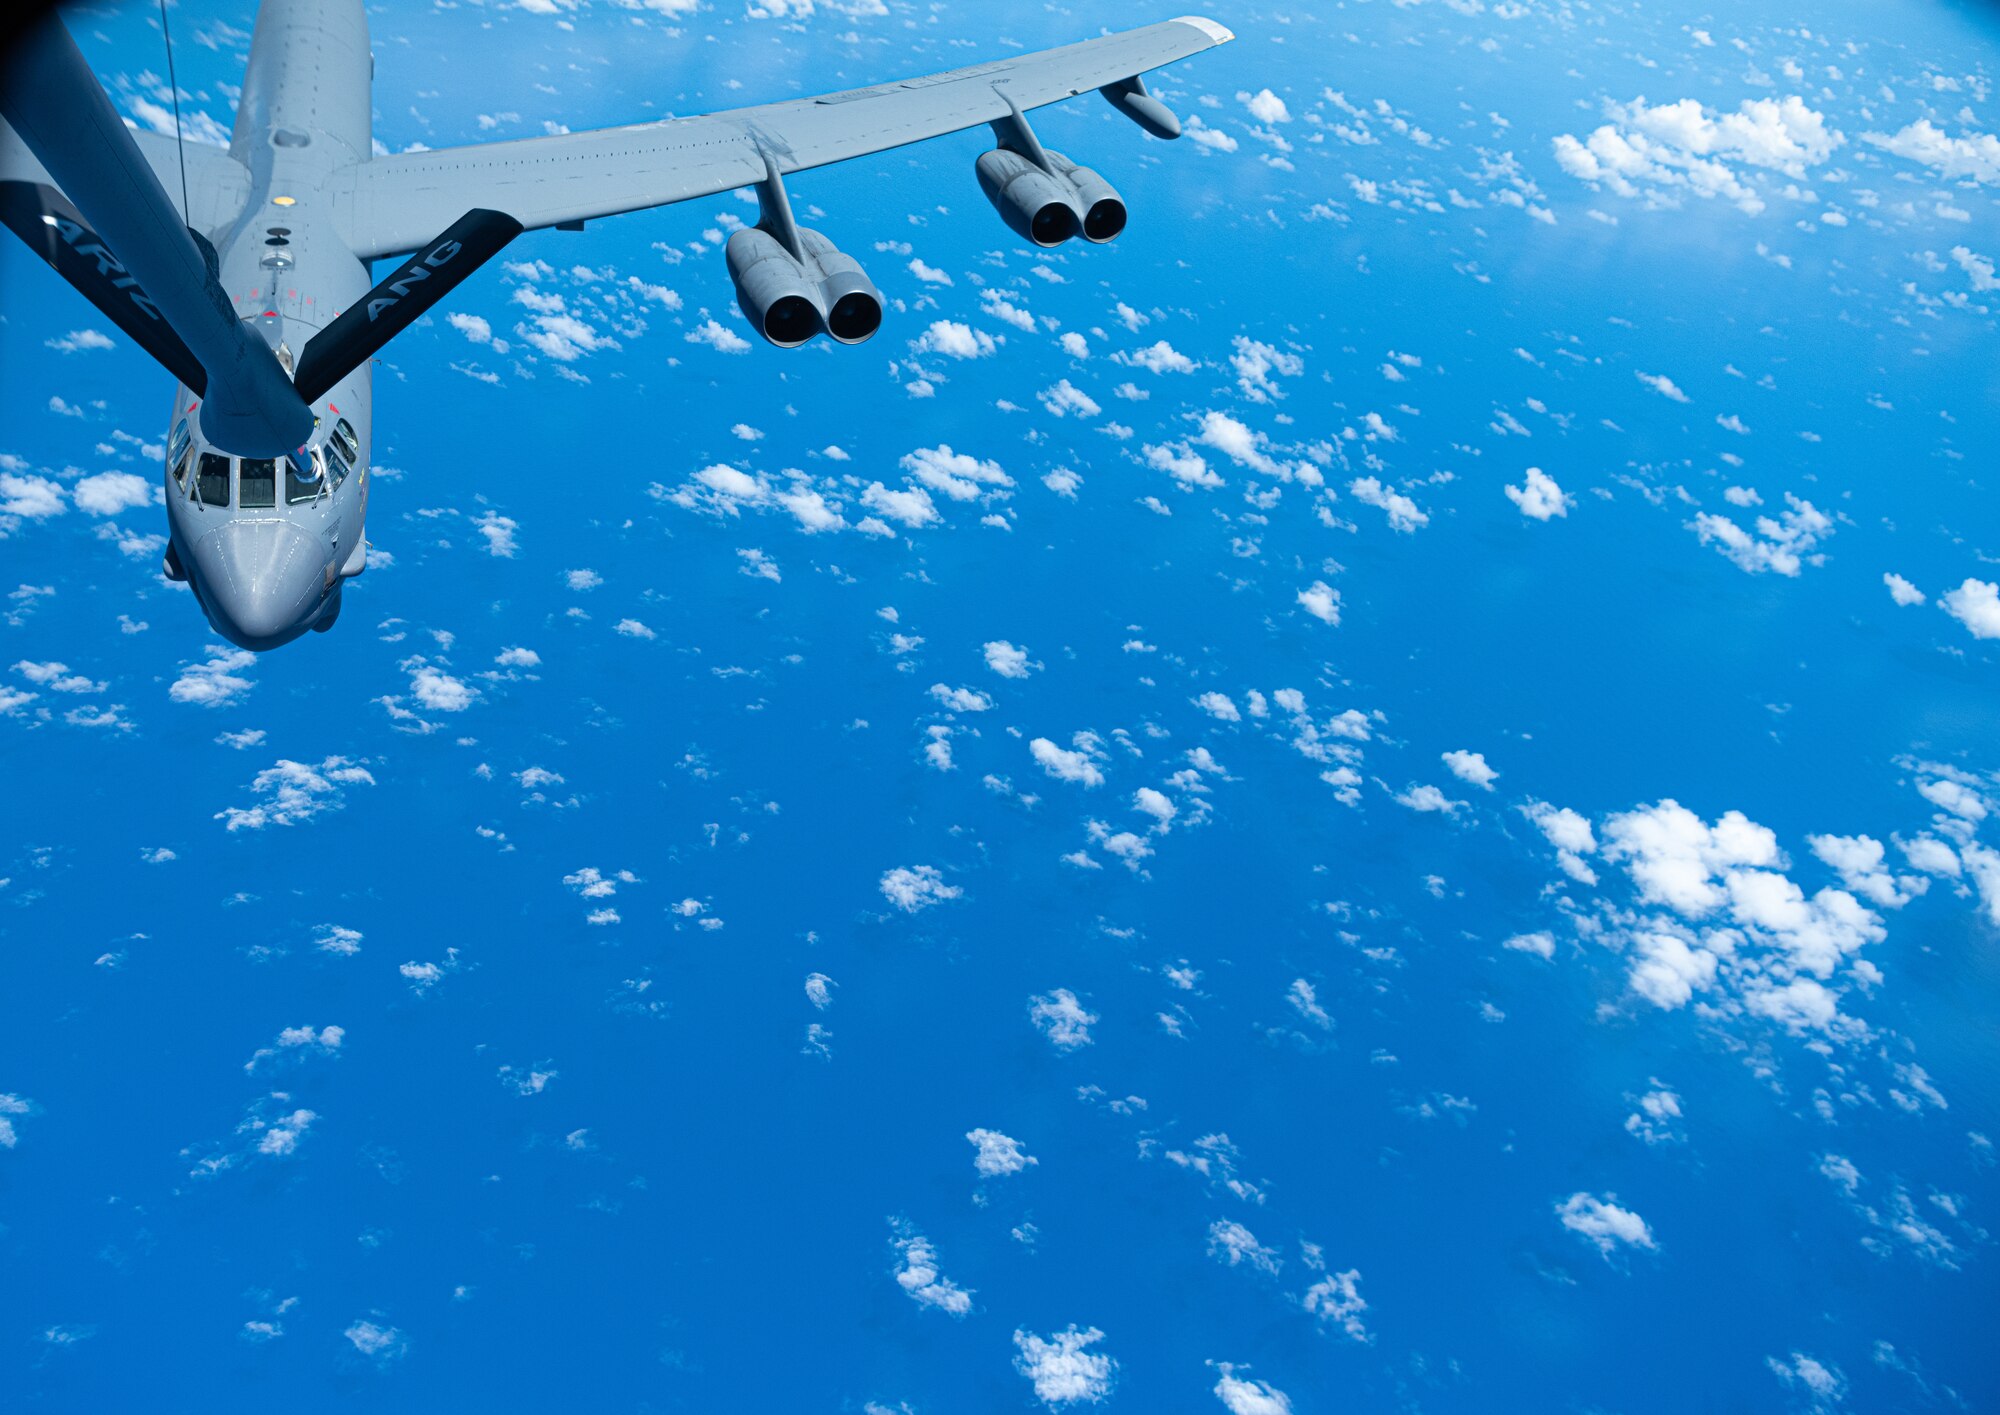 A B-52 Stratofortress assigned to the 2nd Bomb Wing at Barksdale Air Force Base, Louisiana receives aerial refueling from a KC-135 near Andersen Air Force Base, Guam, April 26, 2023. In order to provide a safe, secure, effective and ready strategic deterrent, U.S. Indo-Pacific Command forces must be ready to respond to regional threats. (U.S. Air Force photo by 2nd Lt Jonathan Villegas)